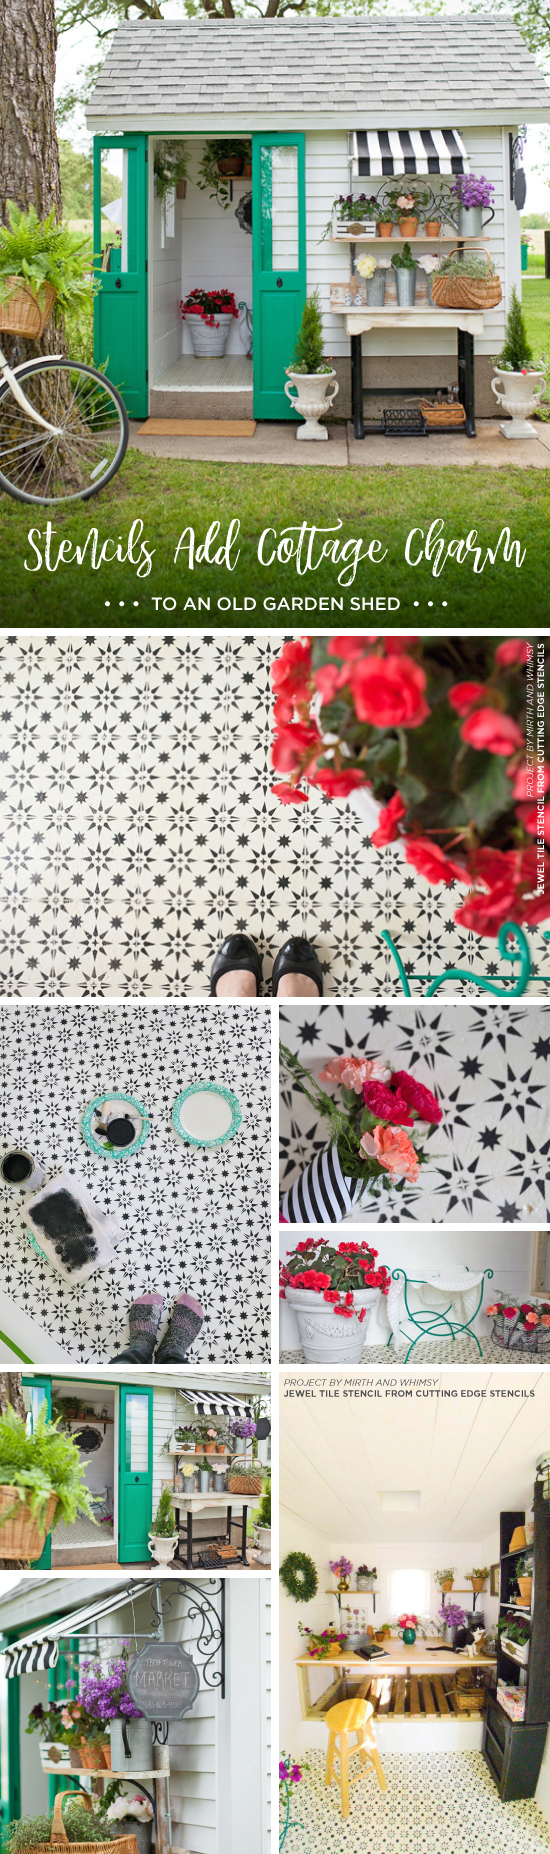 Cutting Edge Stencils shares a DIY farmhouse garden shed makeover with a stenciled cement tile floor. http://www.cuttingedgestencils.com/jewel-tile-stencil-cement-tiles-stencils.html